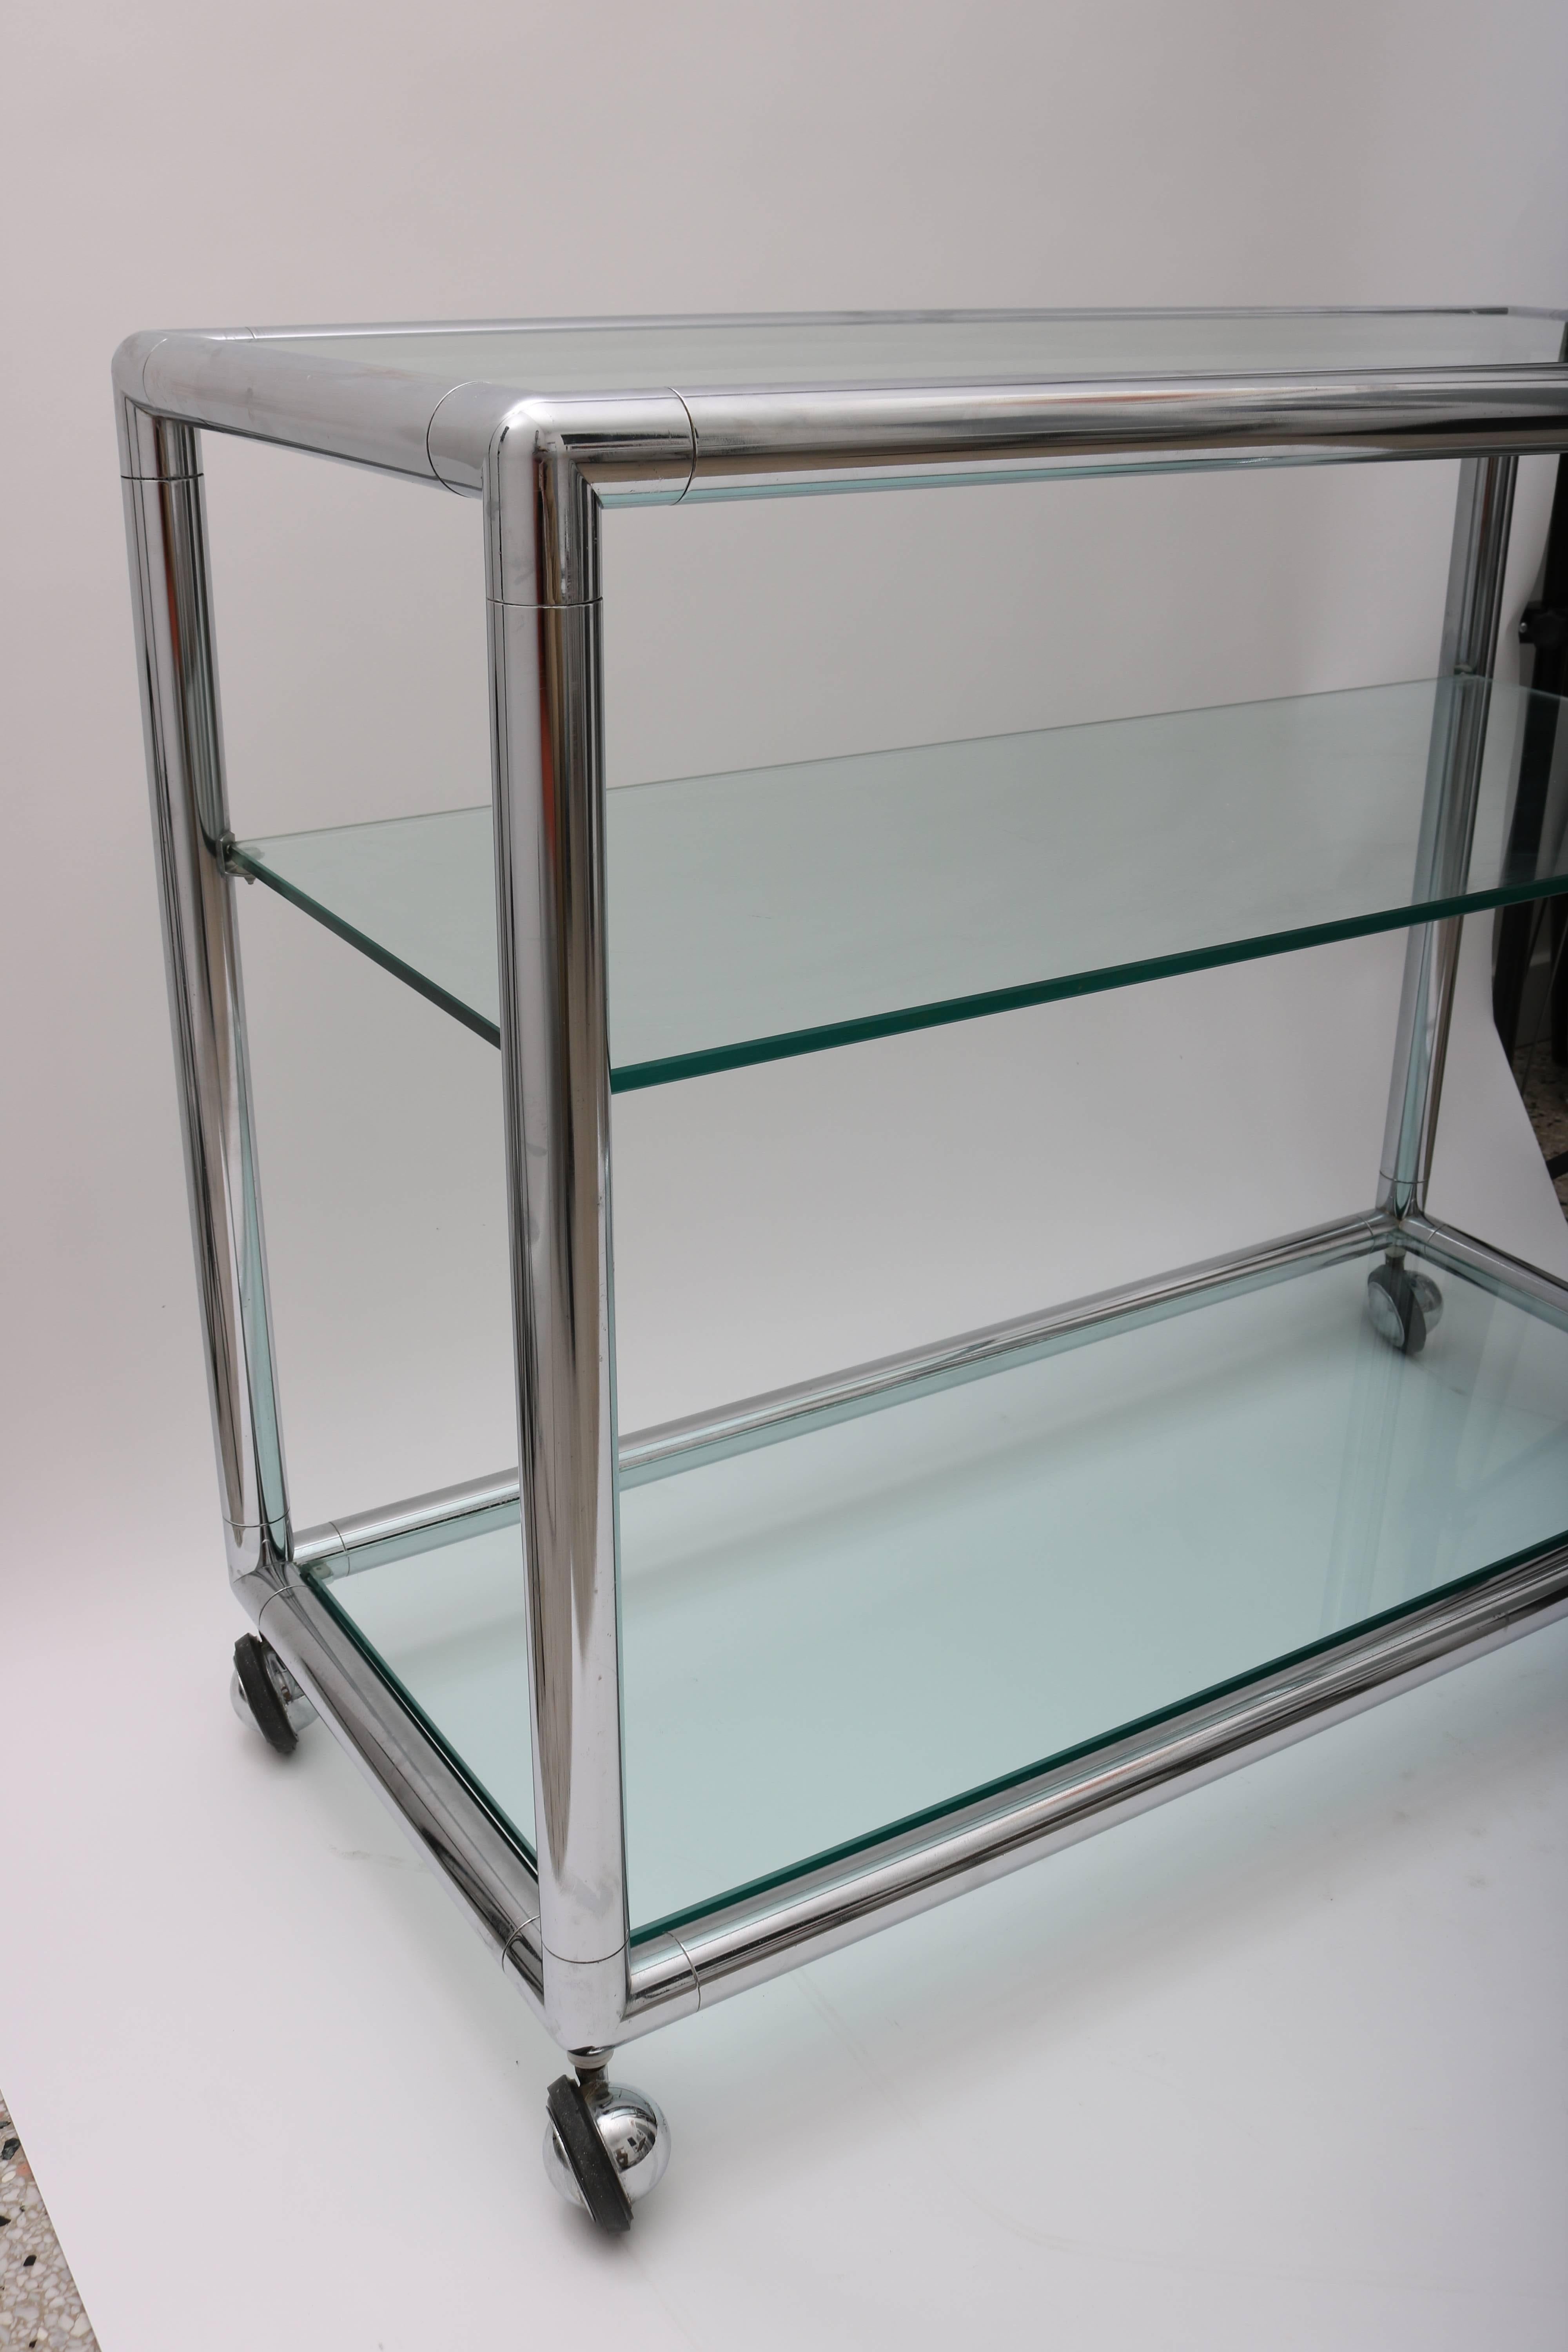 Modern Three-Tiered Polished Chrome and Glass Bar Cart, Attributed to Pace Furniture